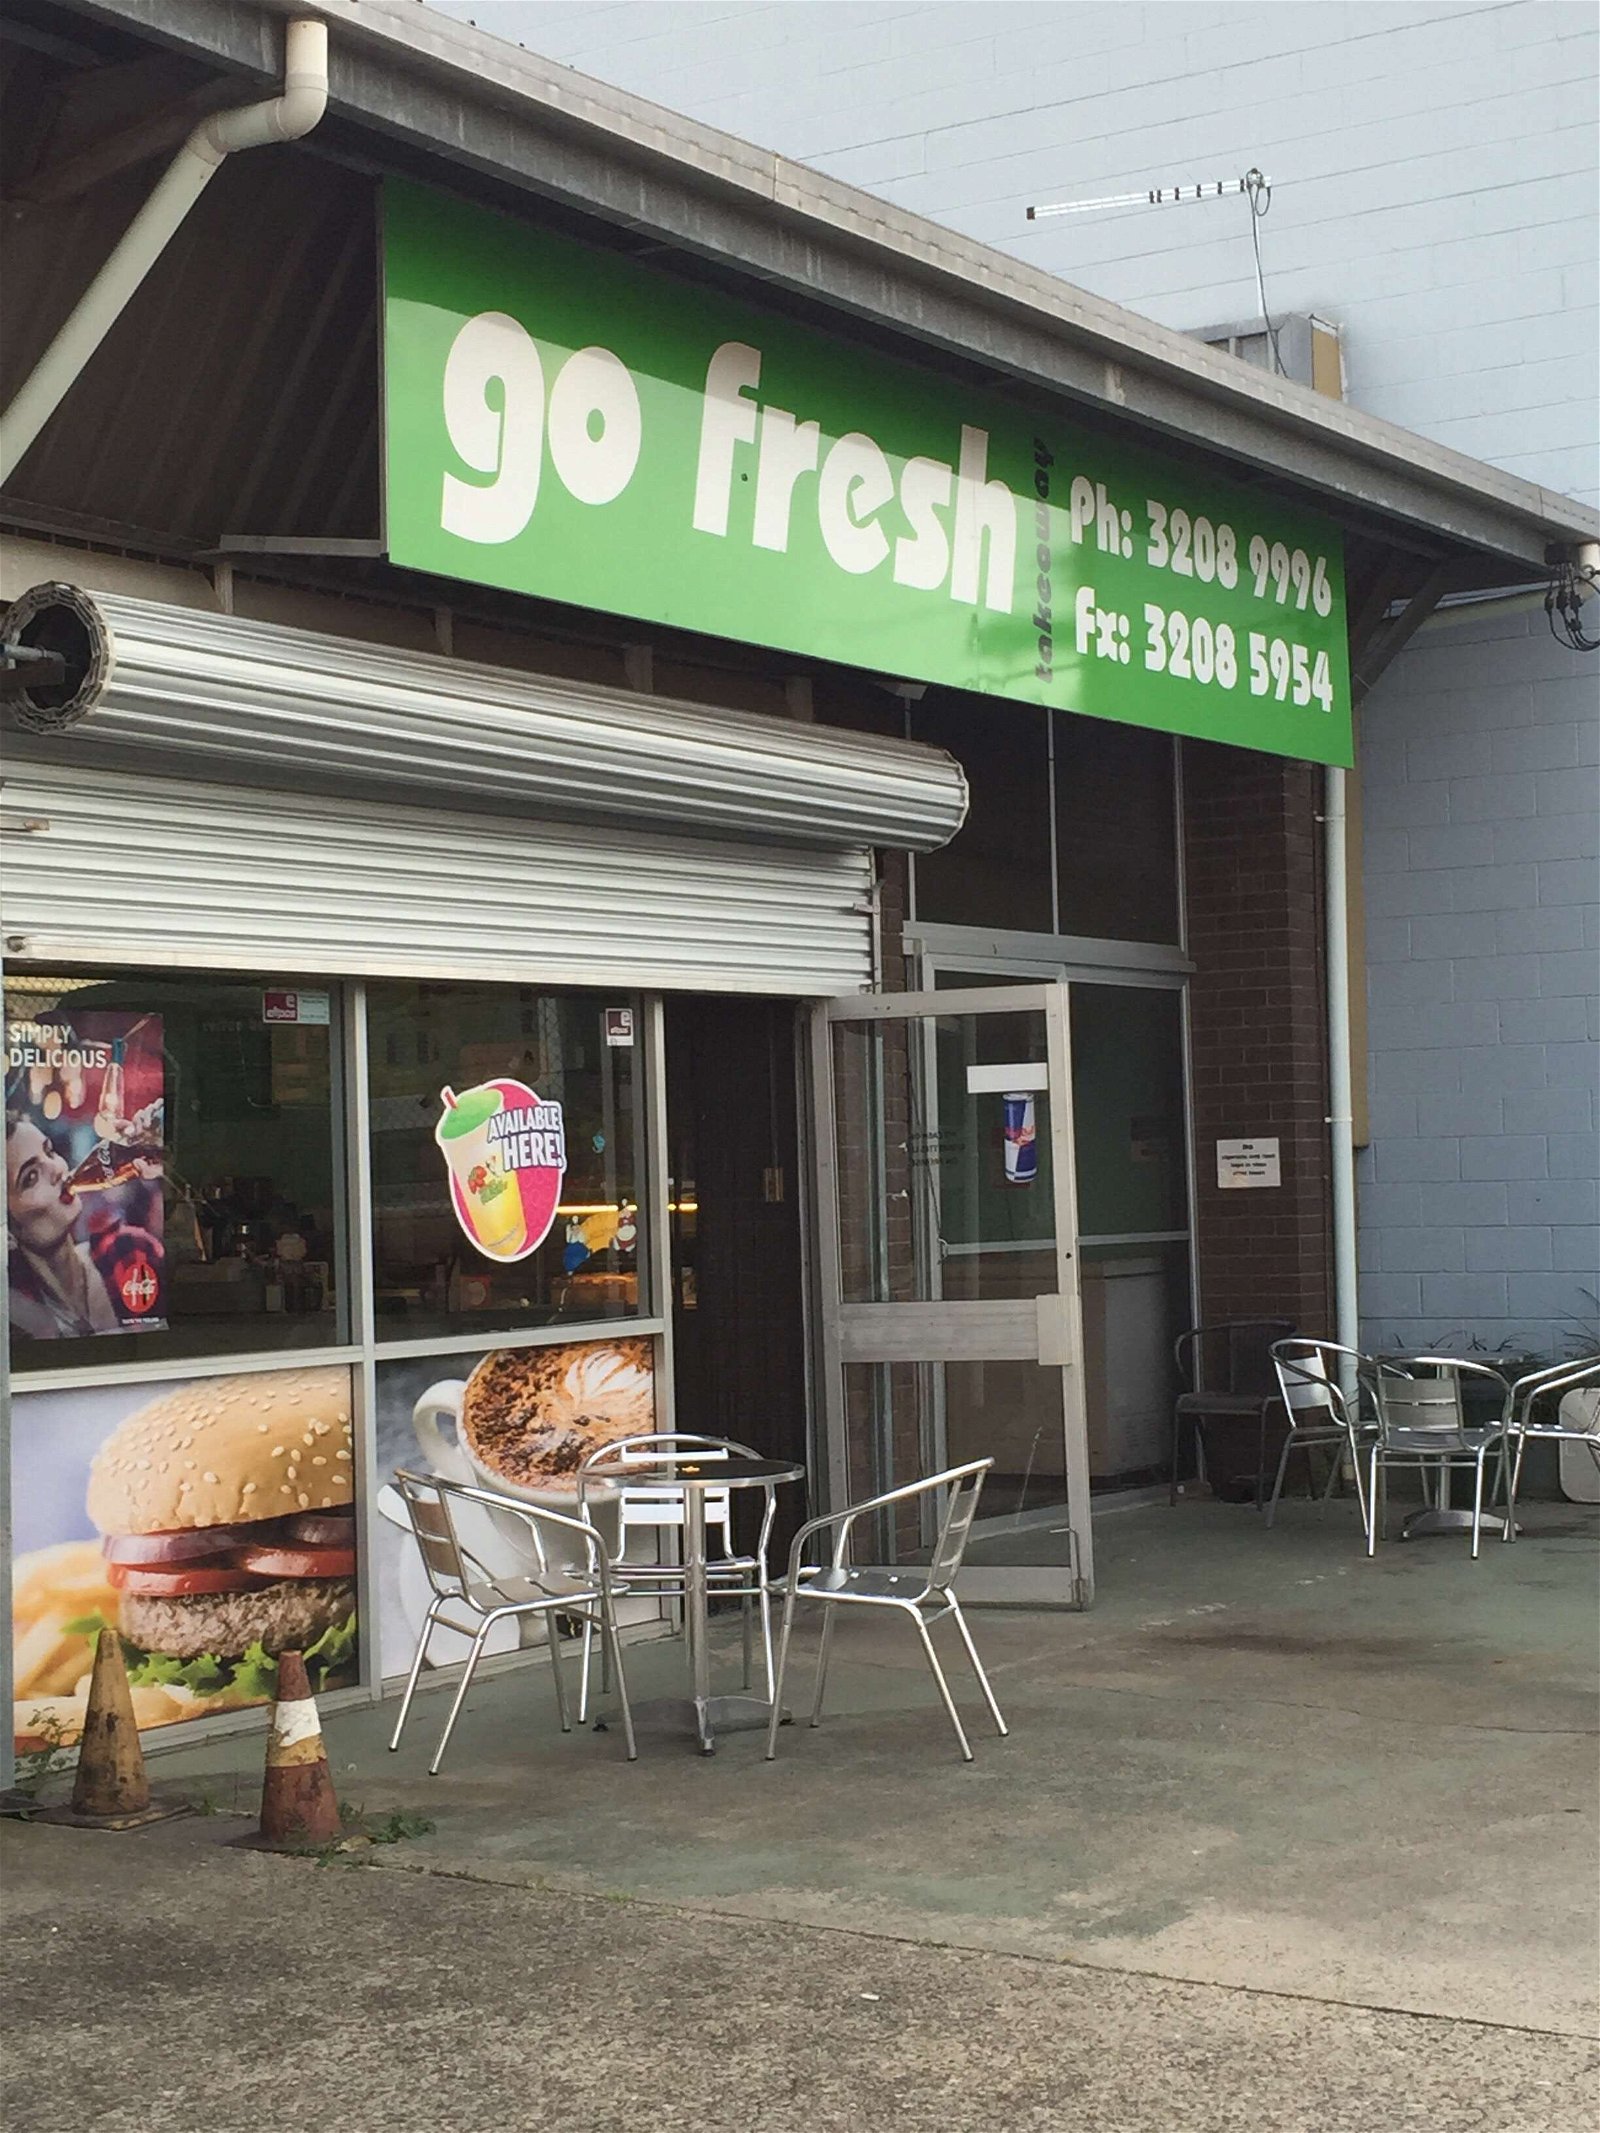 Go Fresh - Food Delivery Shop